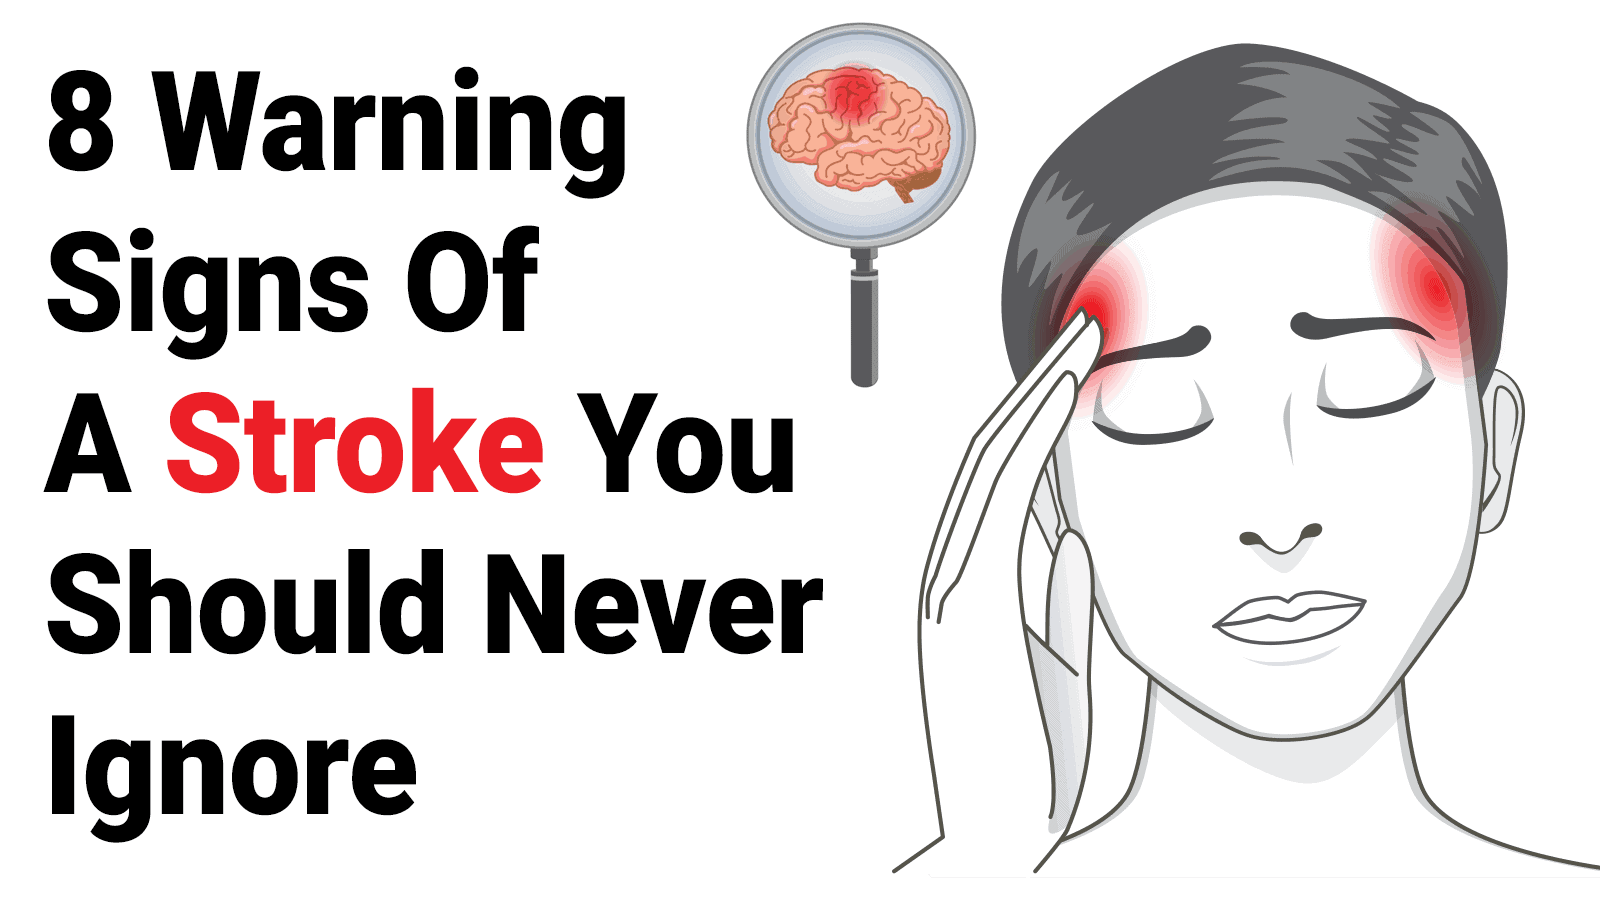 8 Warning Signs Of A Stroke You Should Never Ignore